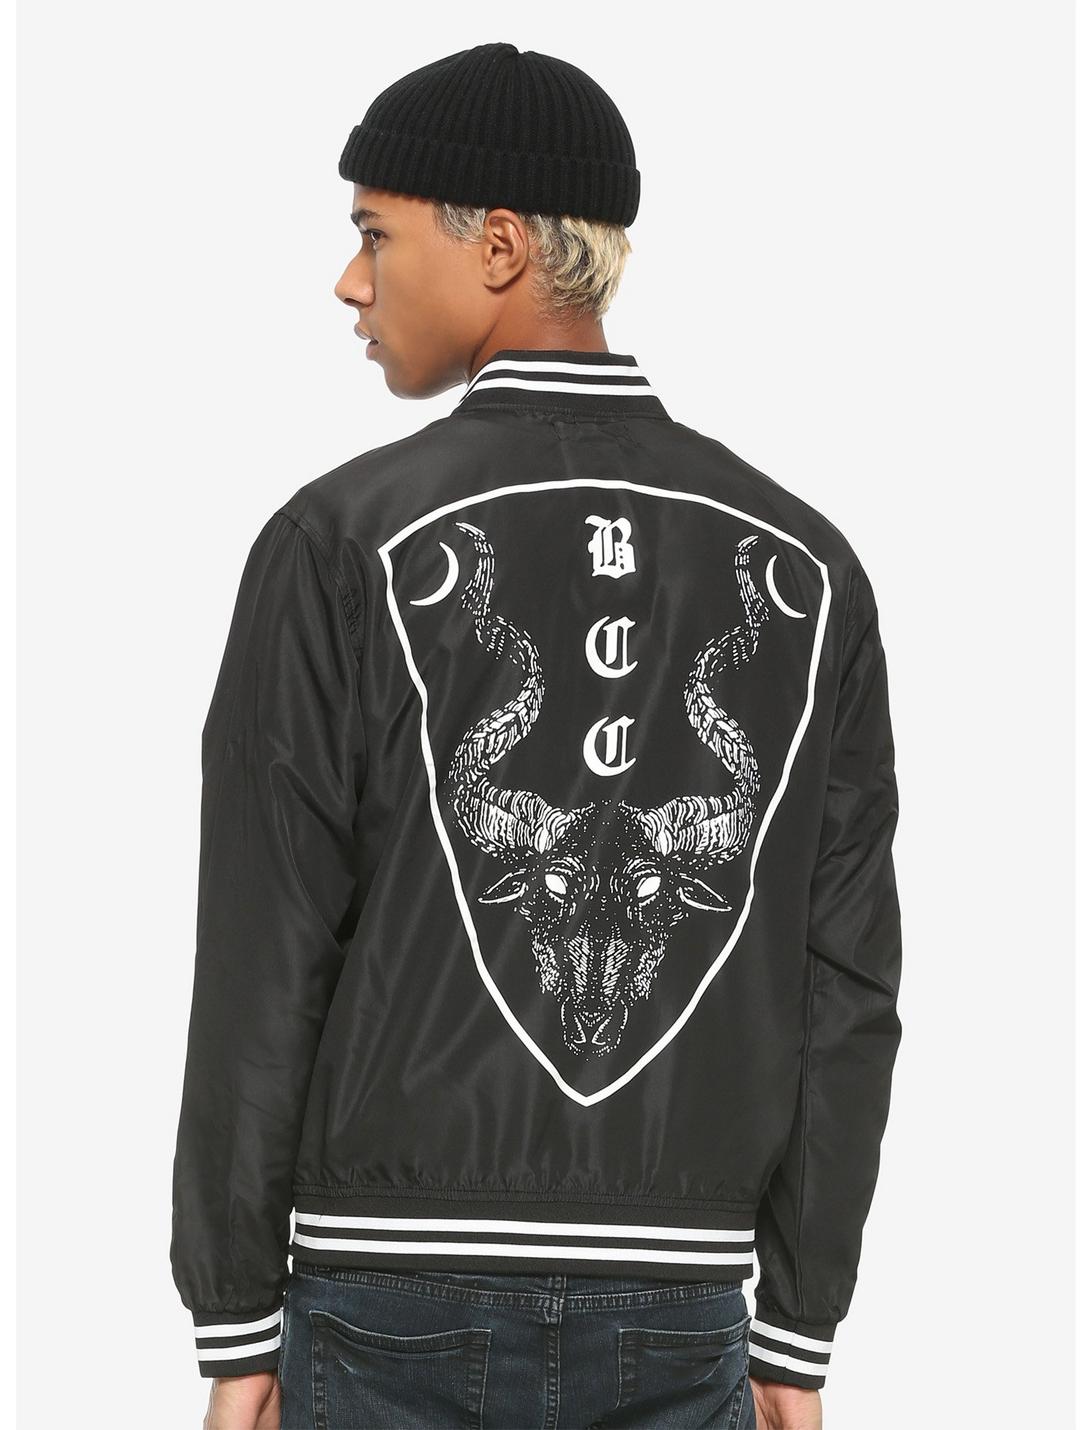 BlackCraft Cult Bomber Jacket Hot Topic Exclusive, WHITE, hi-res